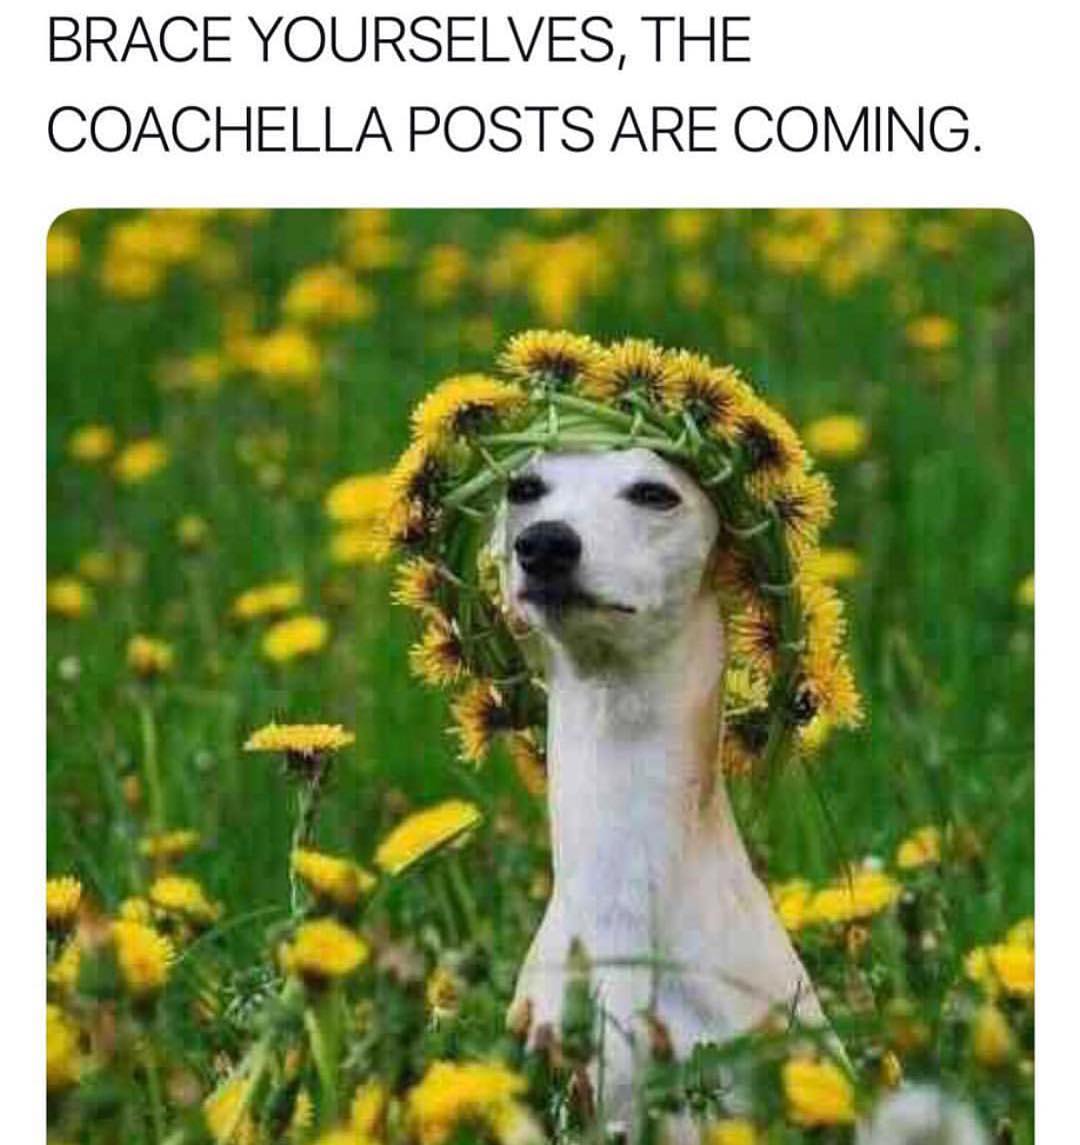 Brace yourselves, the coachella posts are coming.